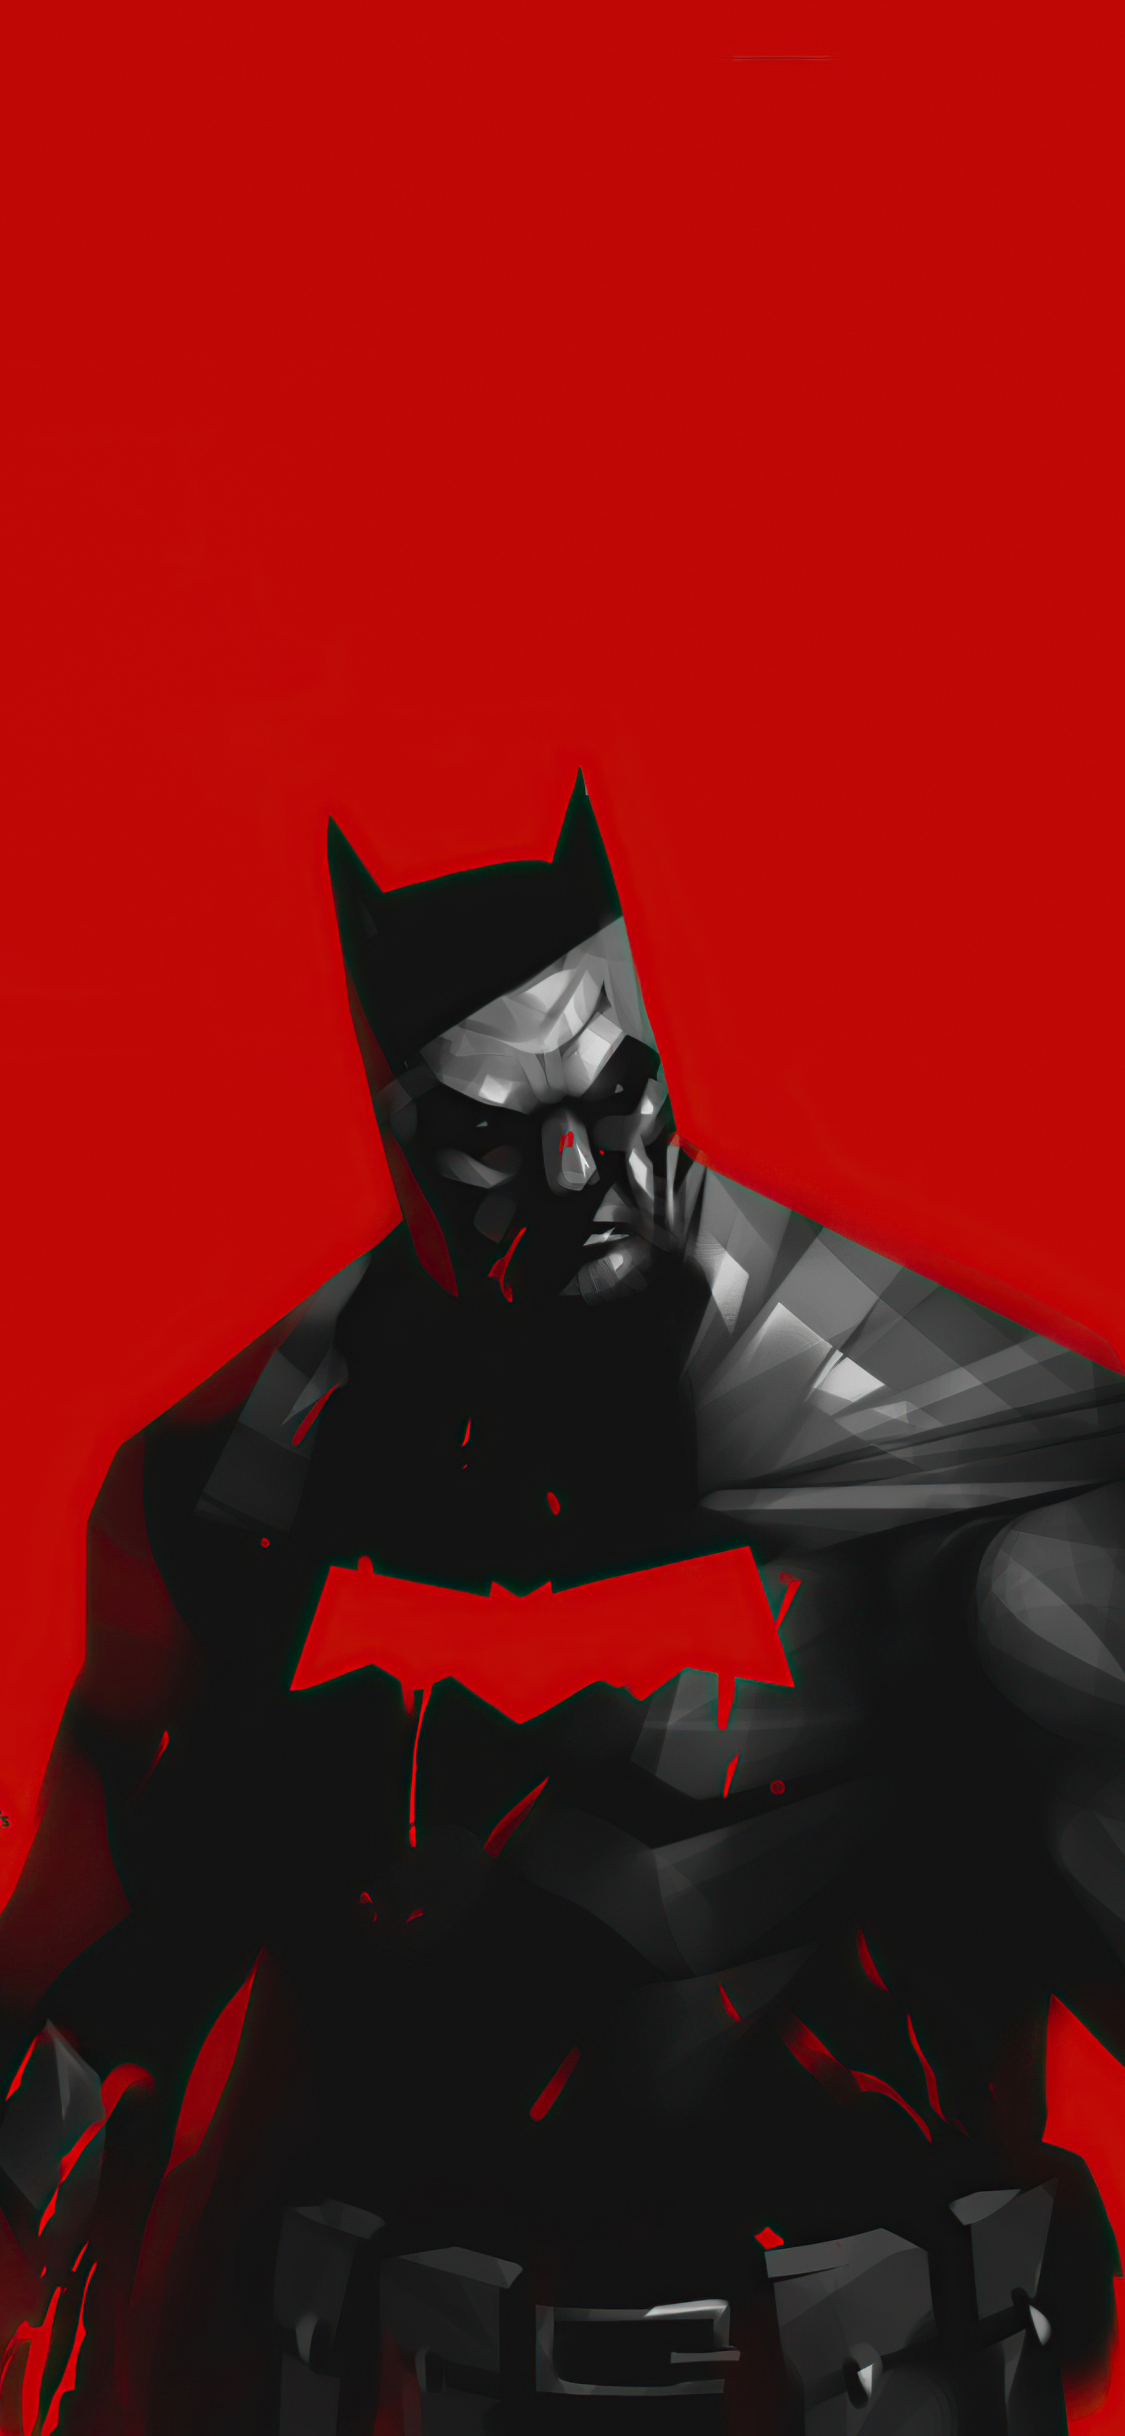 Download wallpaper 1125x2436 batman, red series, comic cover, iphone x,  1125x2436 hd background, 26868